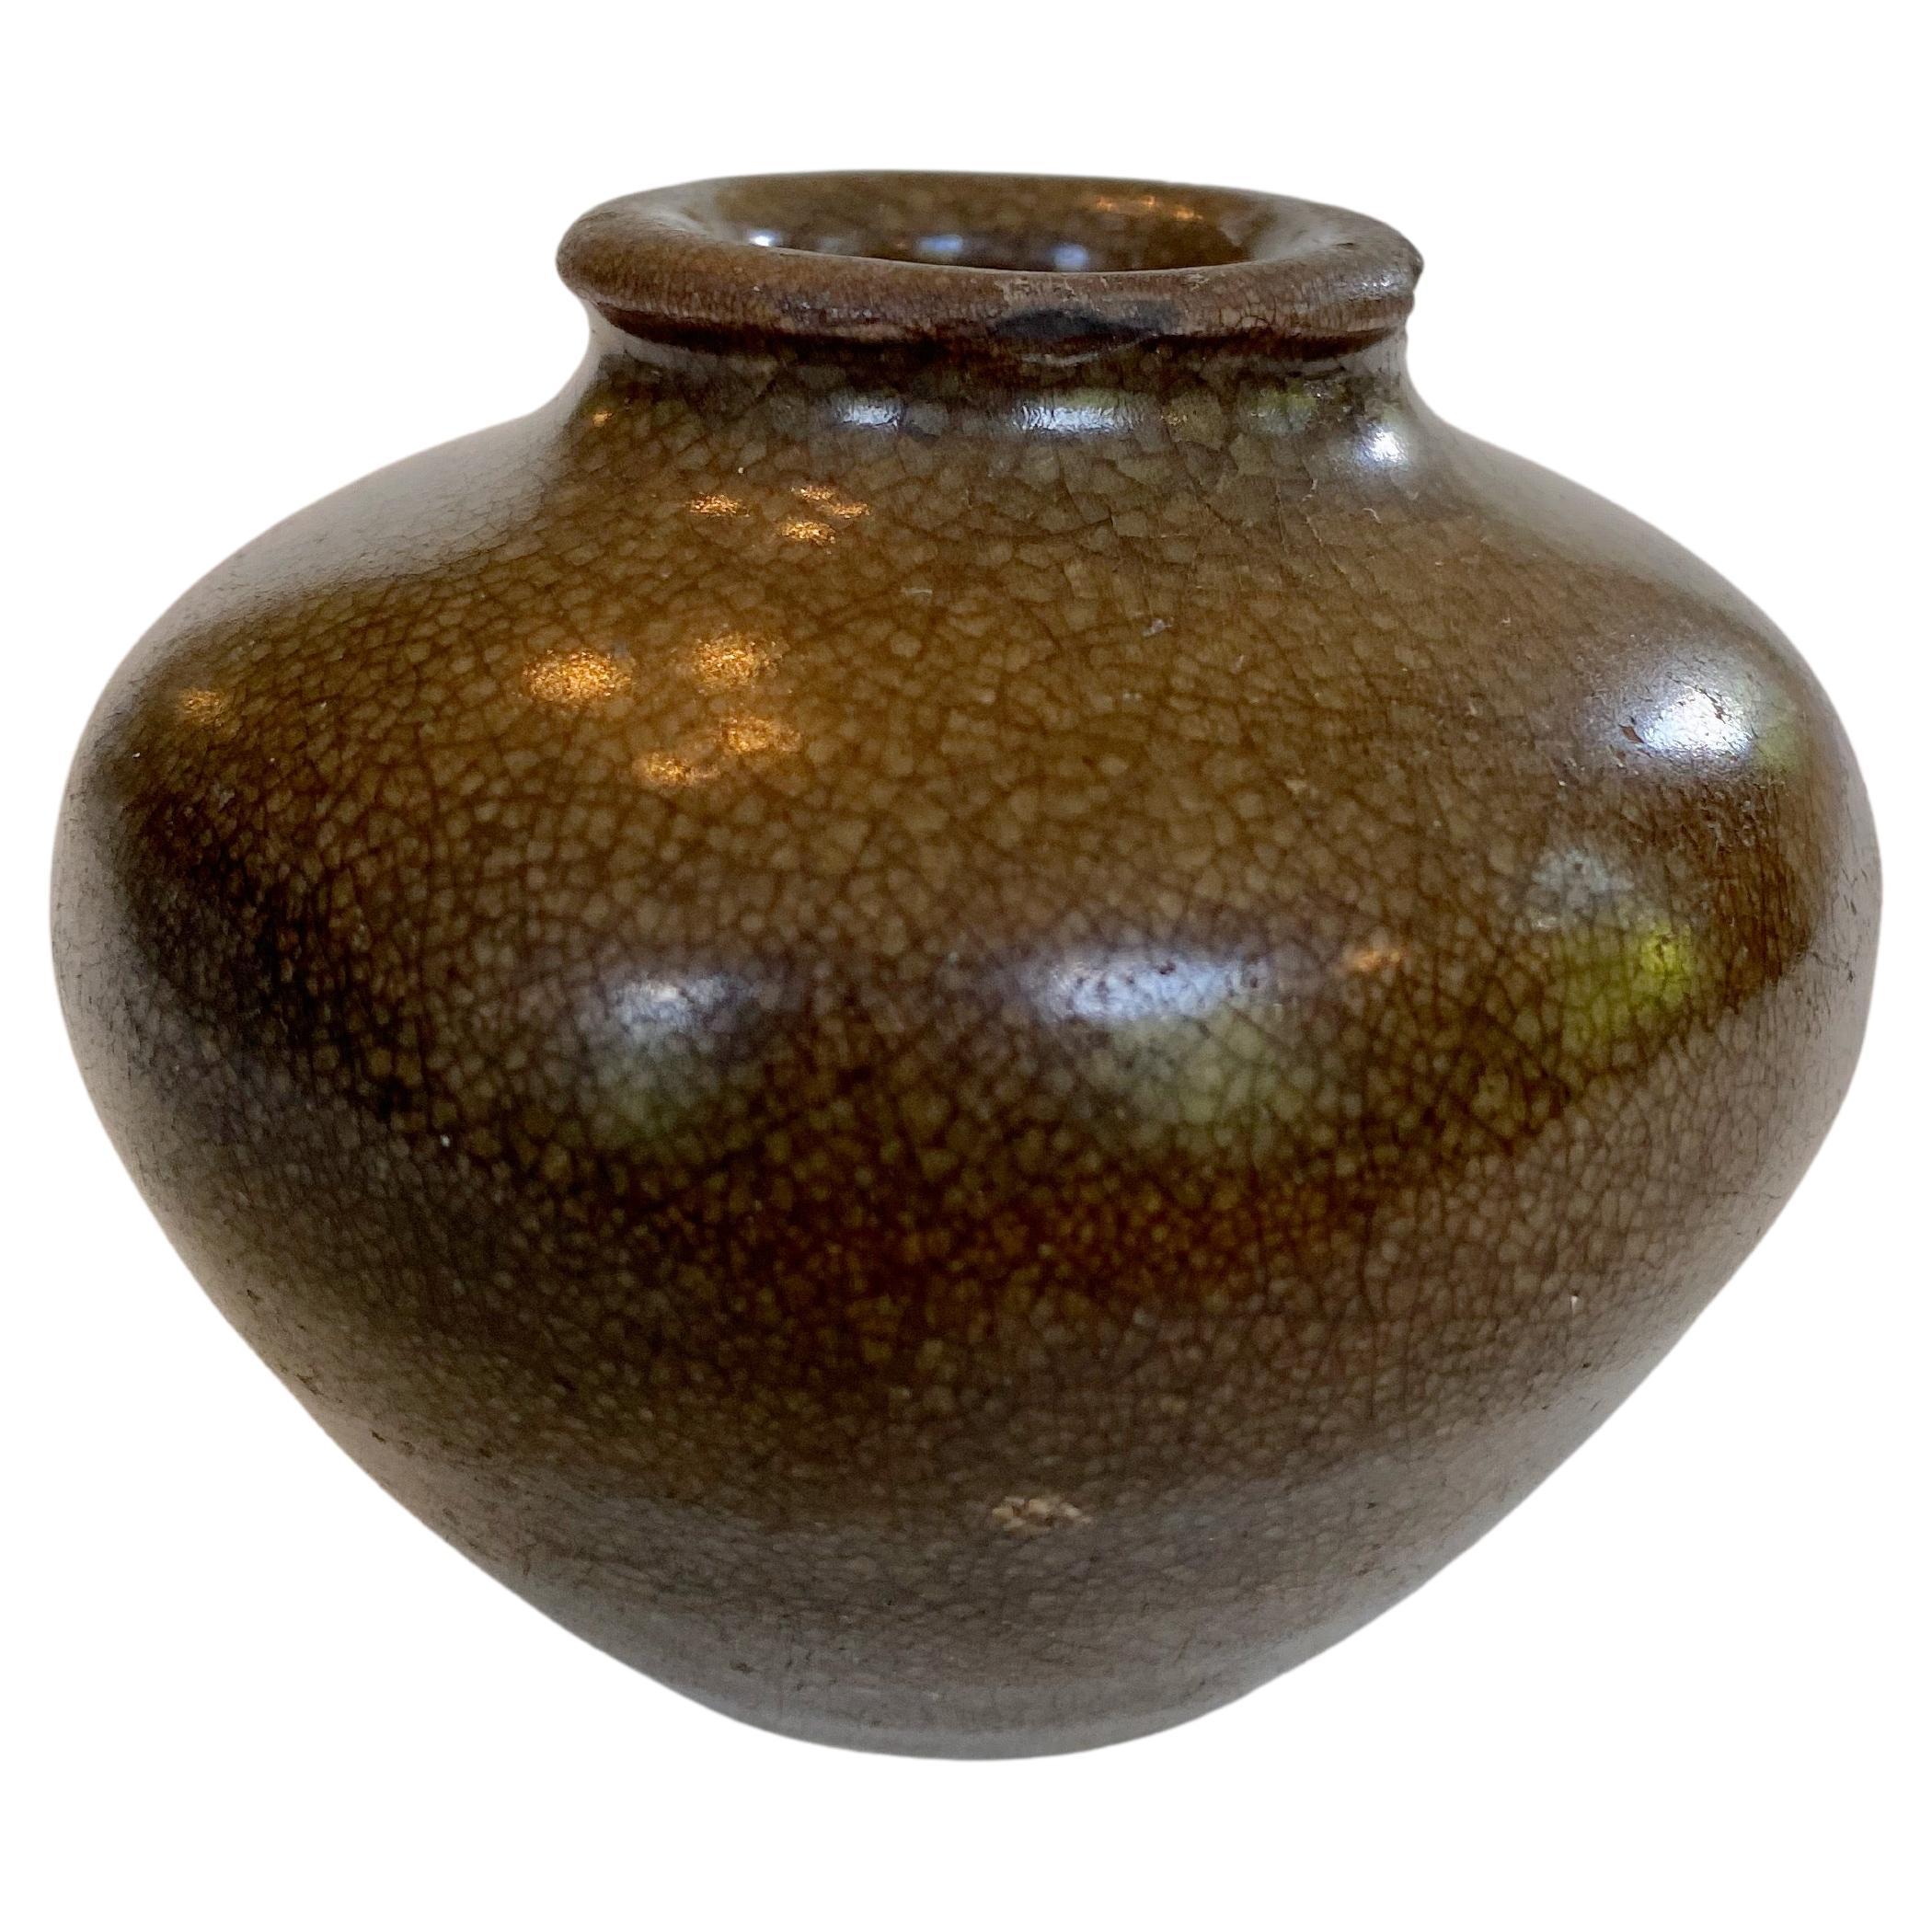 12th Century Song Jarlet with Deep Brown Glaze